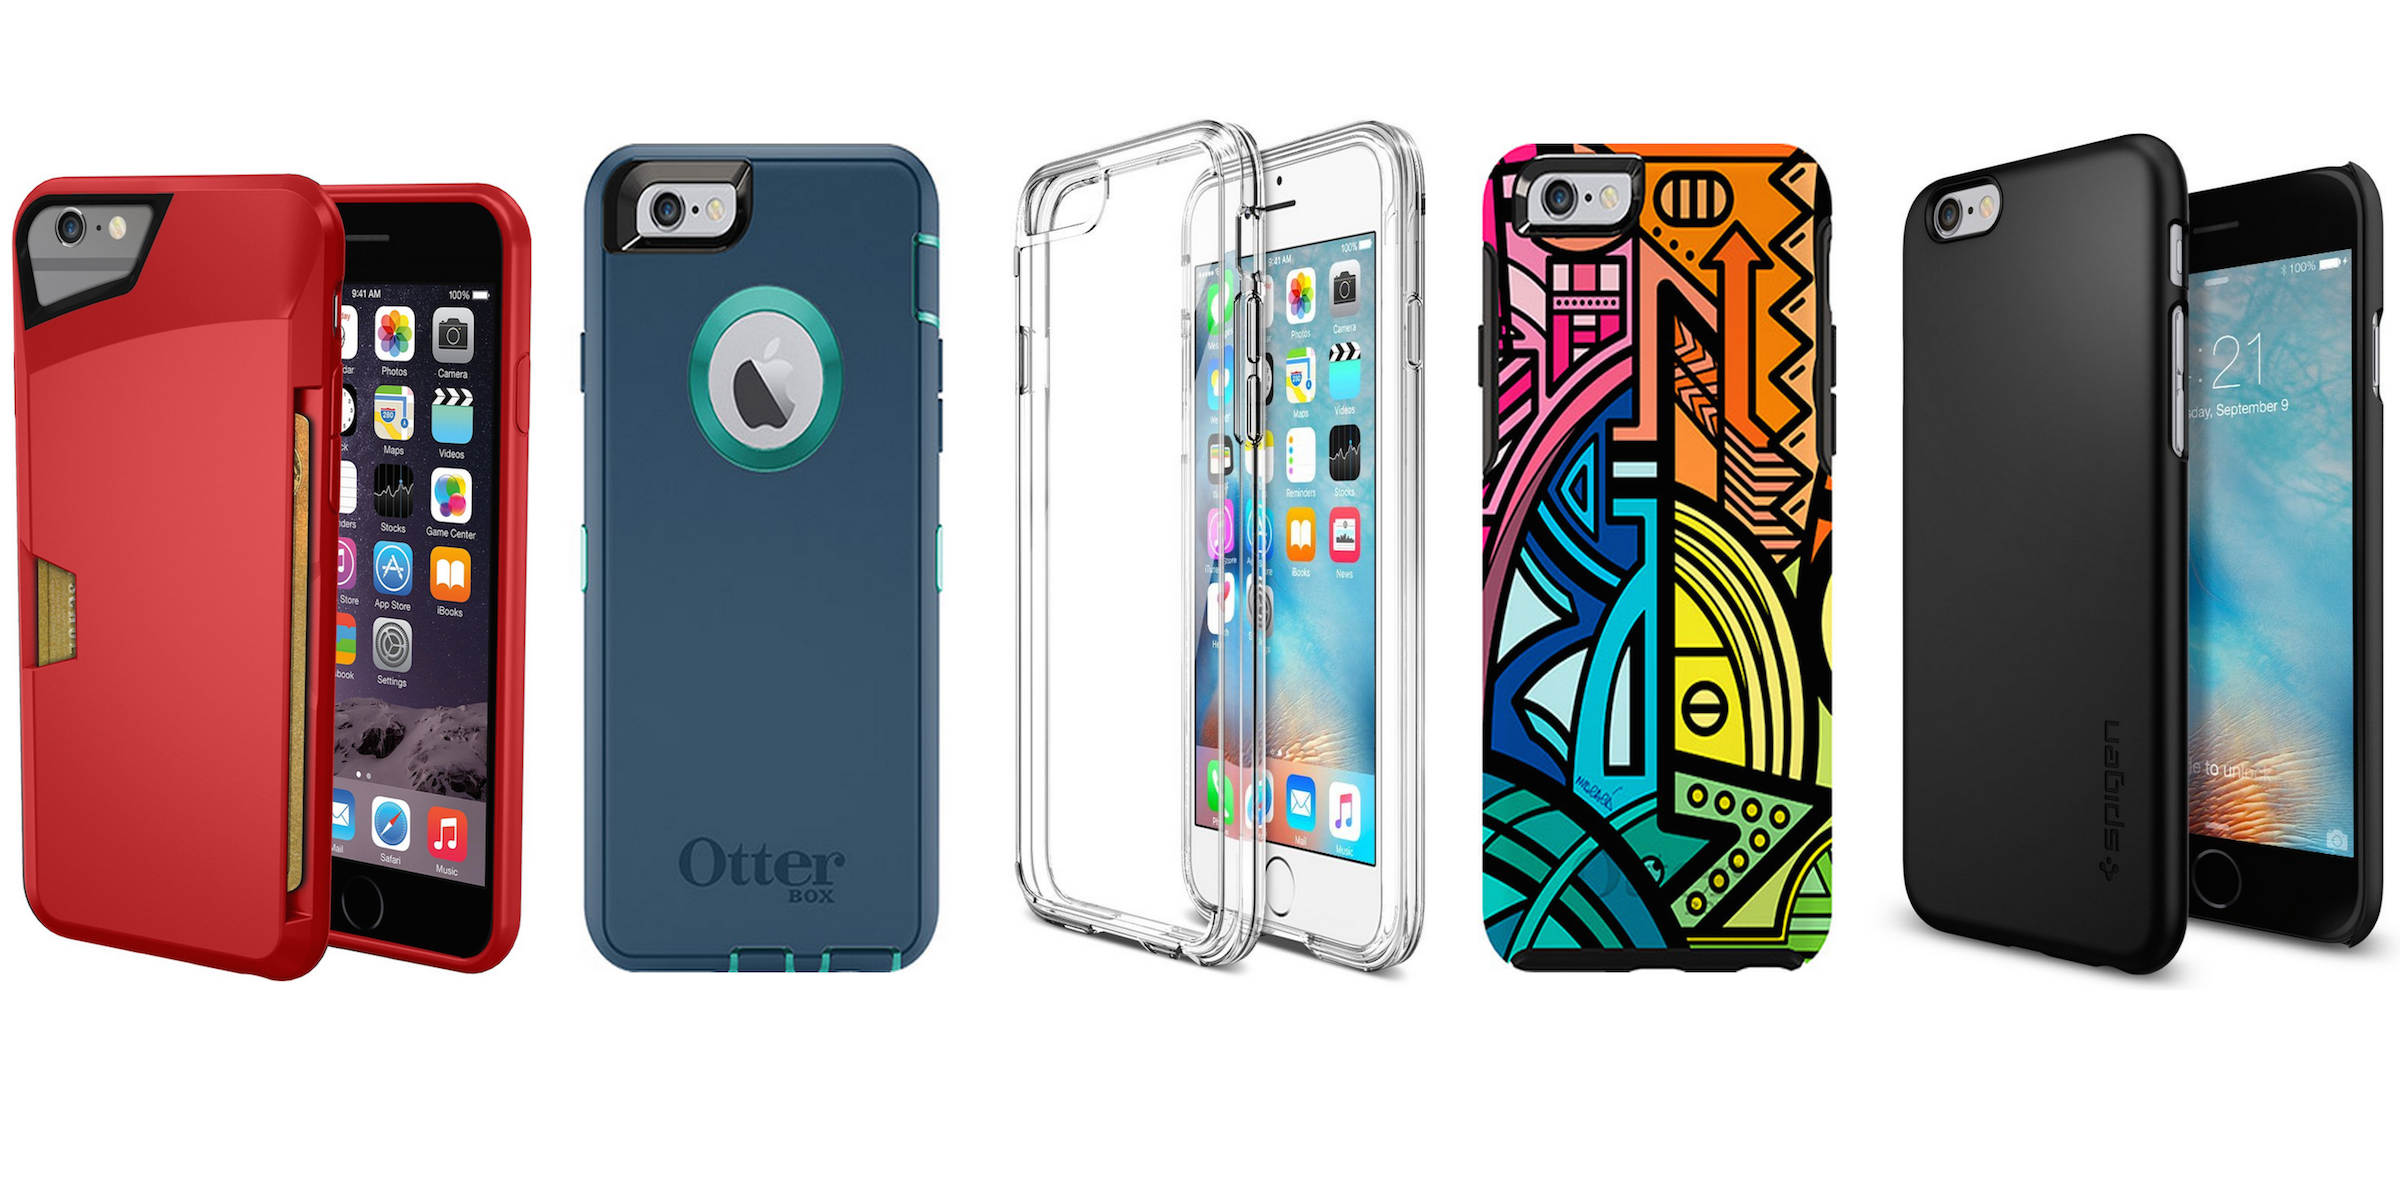 The best iPhone 6s 6s Plus cases available order now - 9to5Mac